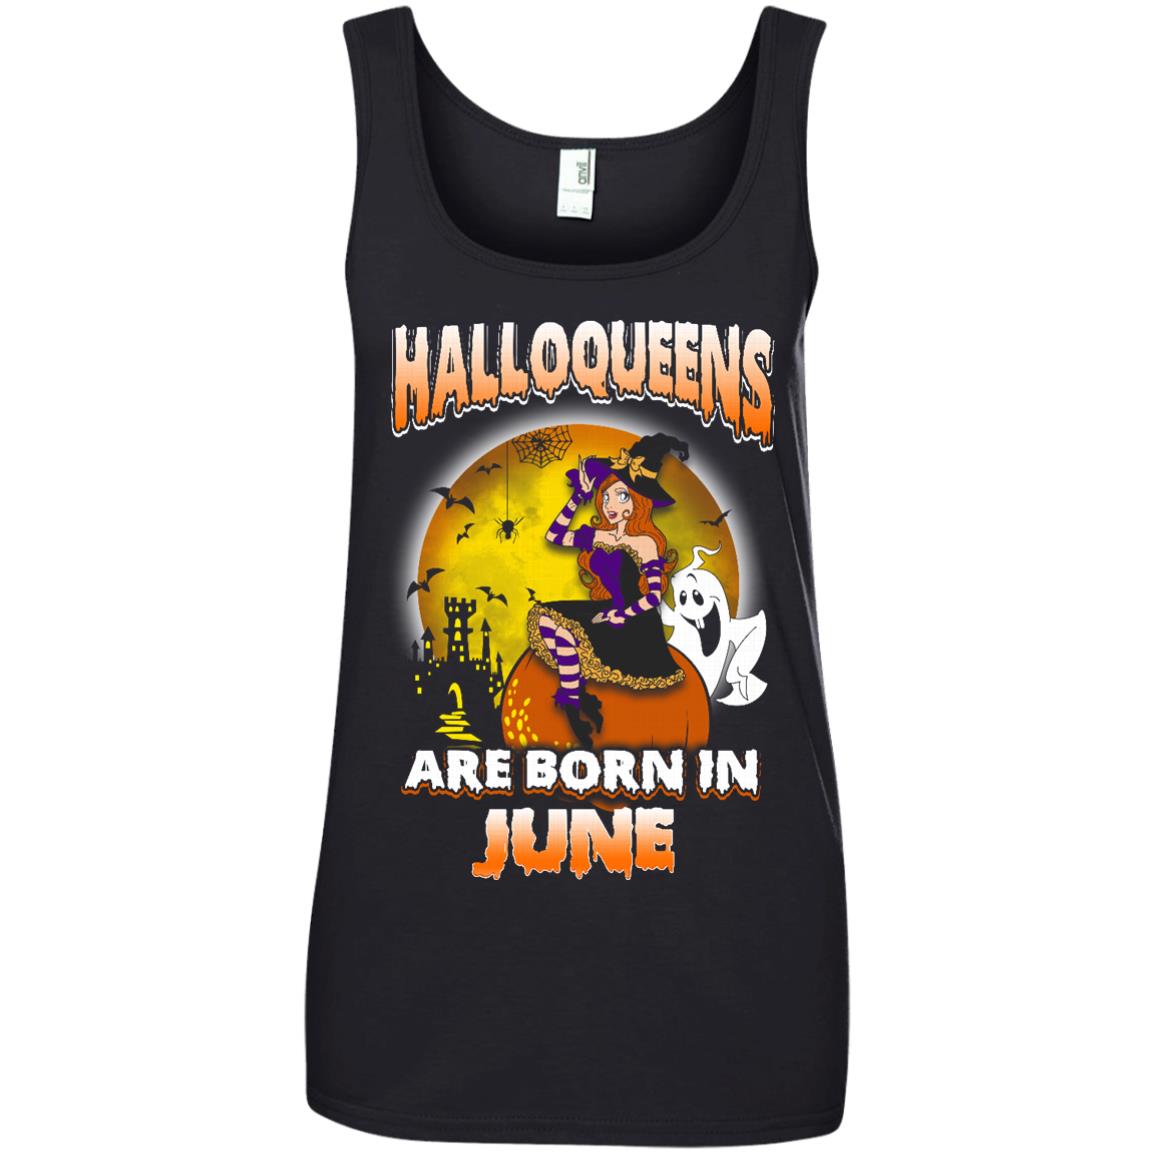 Halloqueens are born in June shirt, hoodie, tank